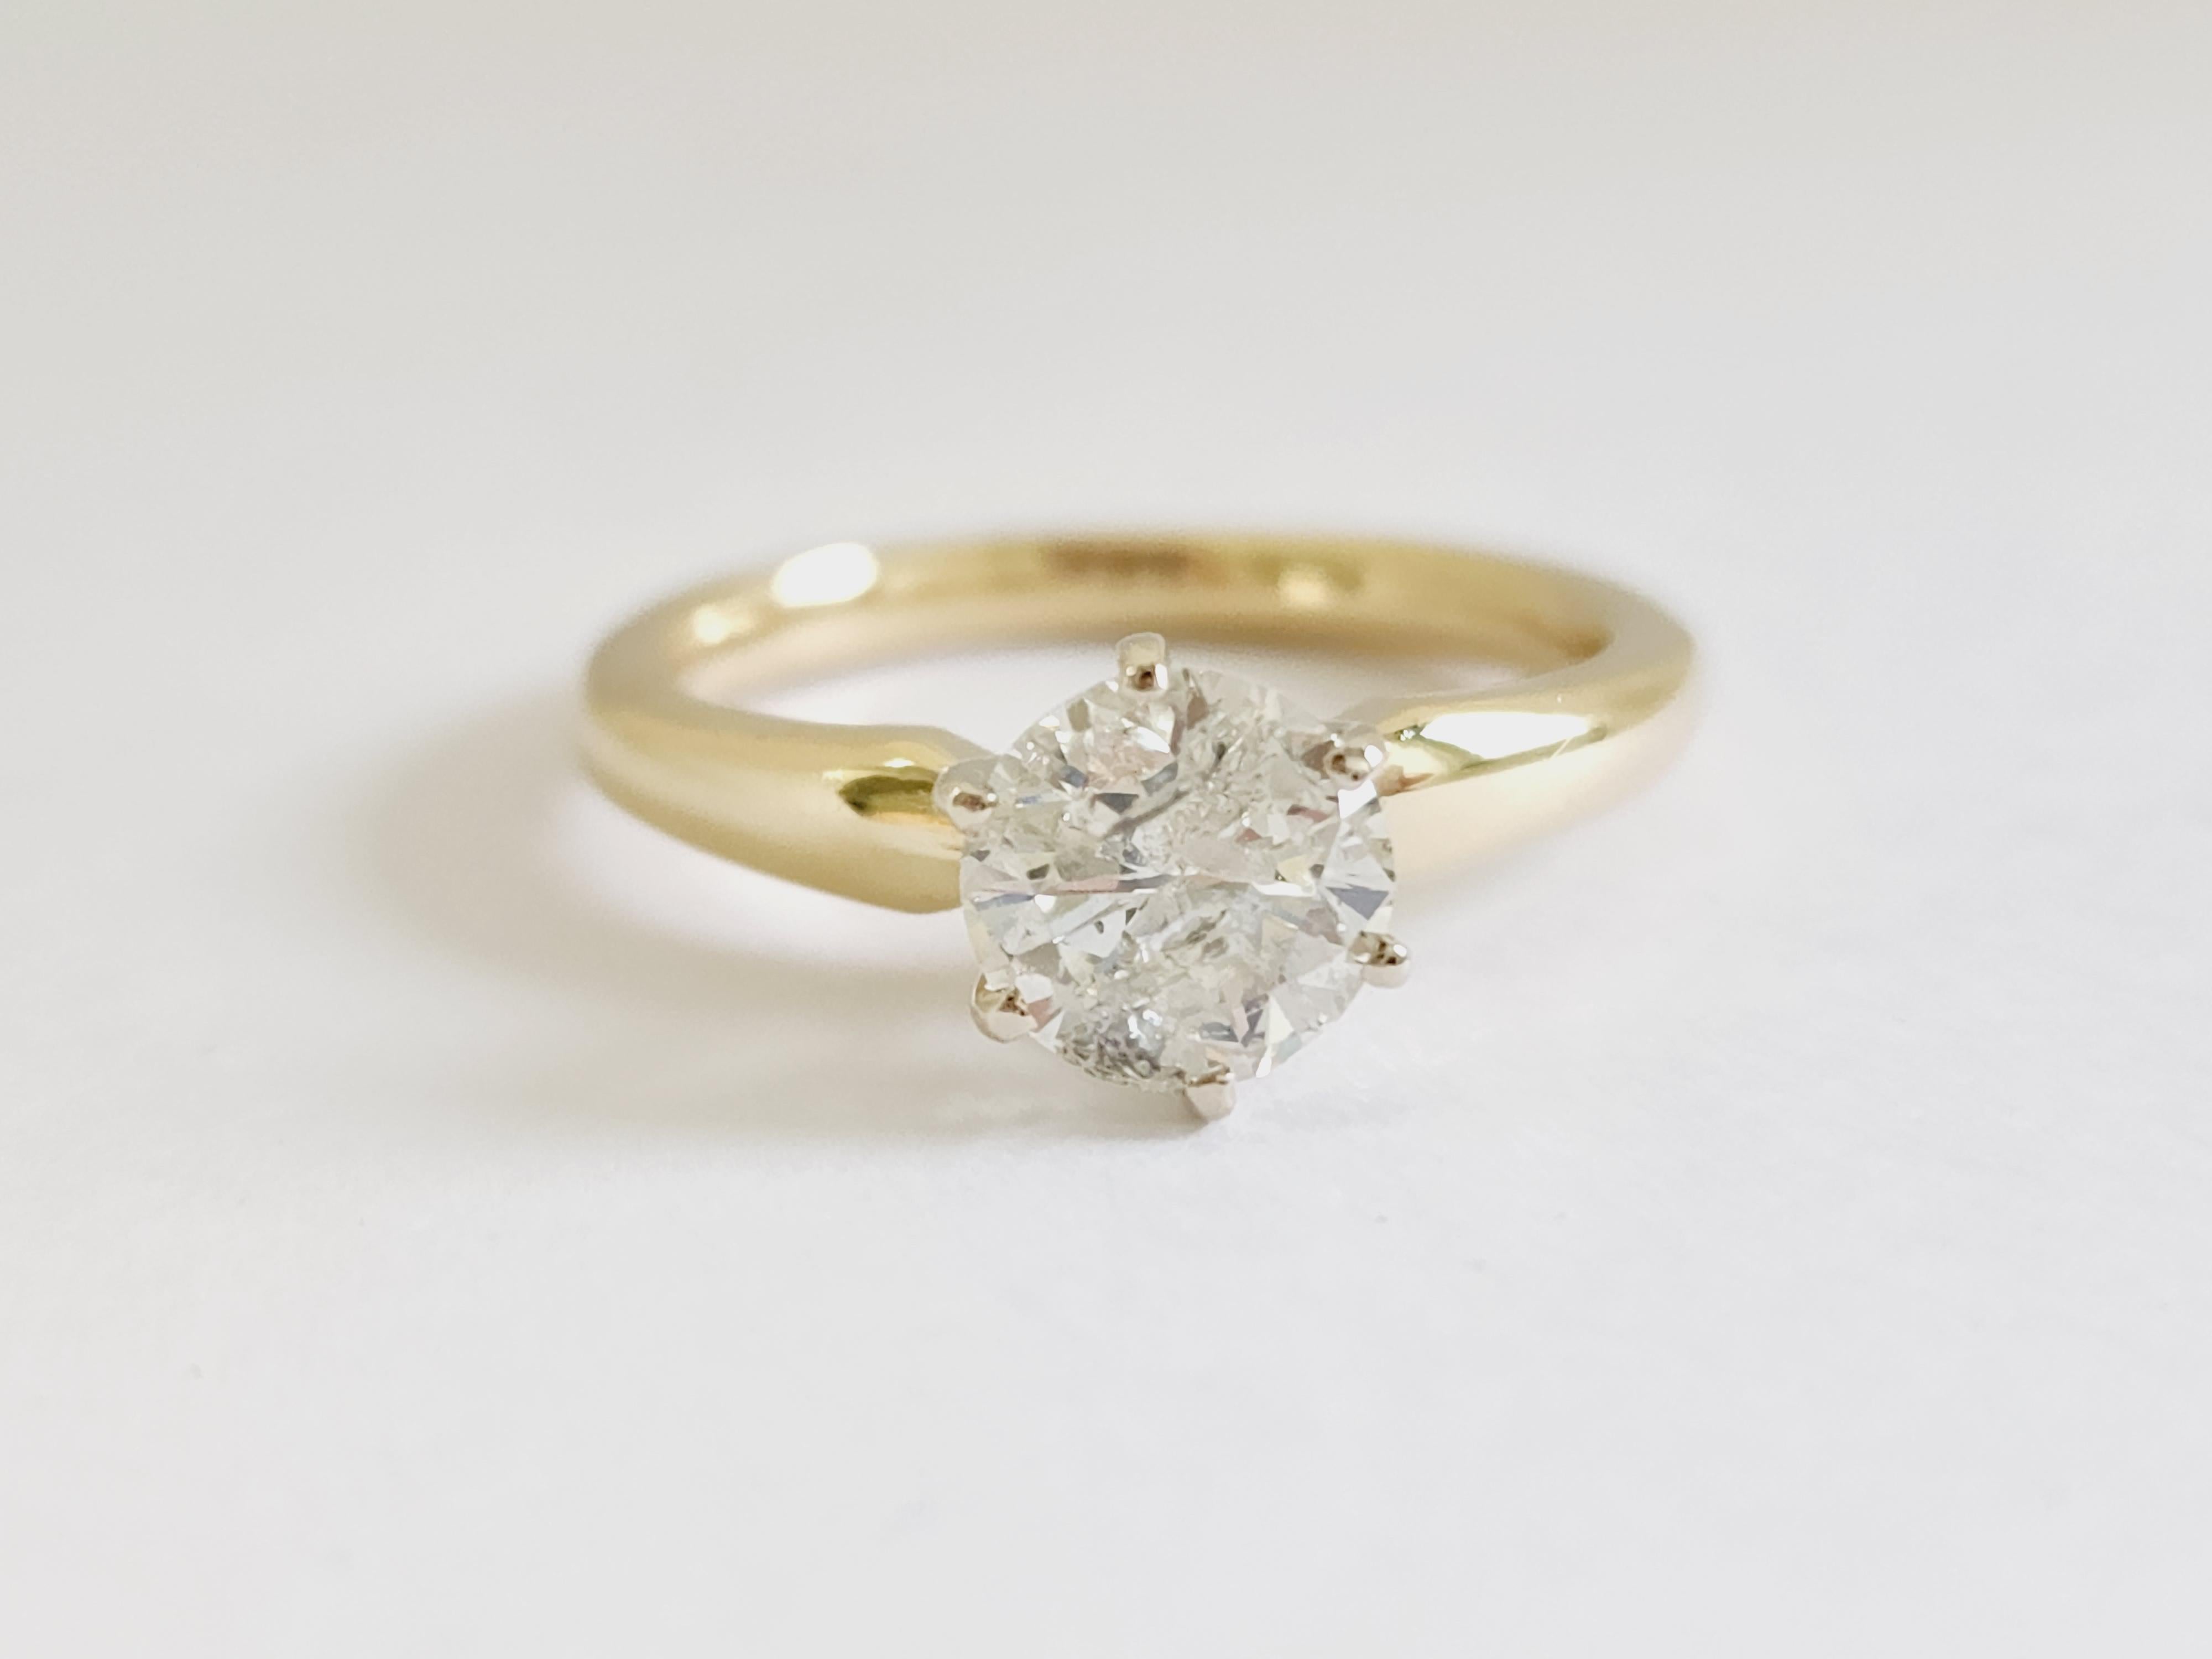 1.27 ct round brilliant cut natural diamonds. 6 prong solitaire setting, set in 14k yellow gold. Ring Size 6.5.